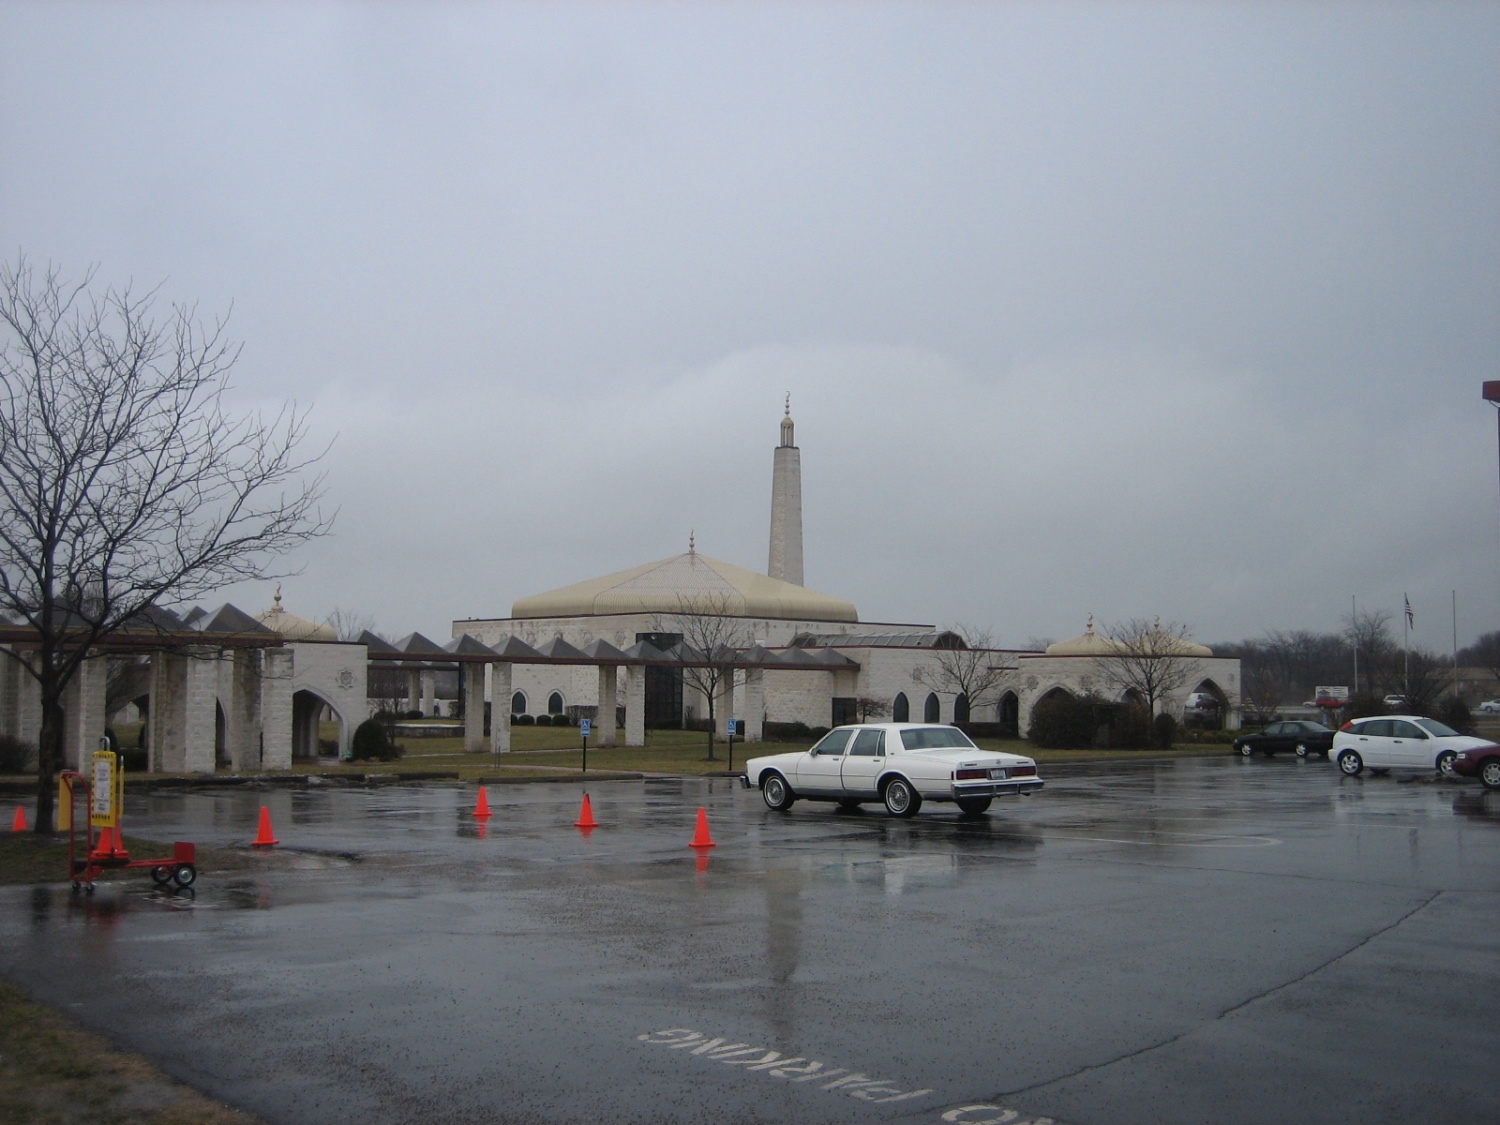 View from parking lot looking east towards masjid